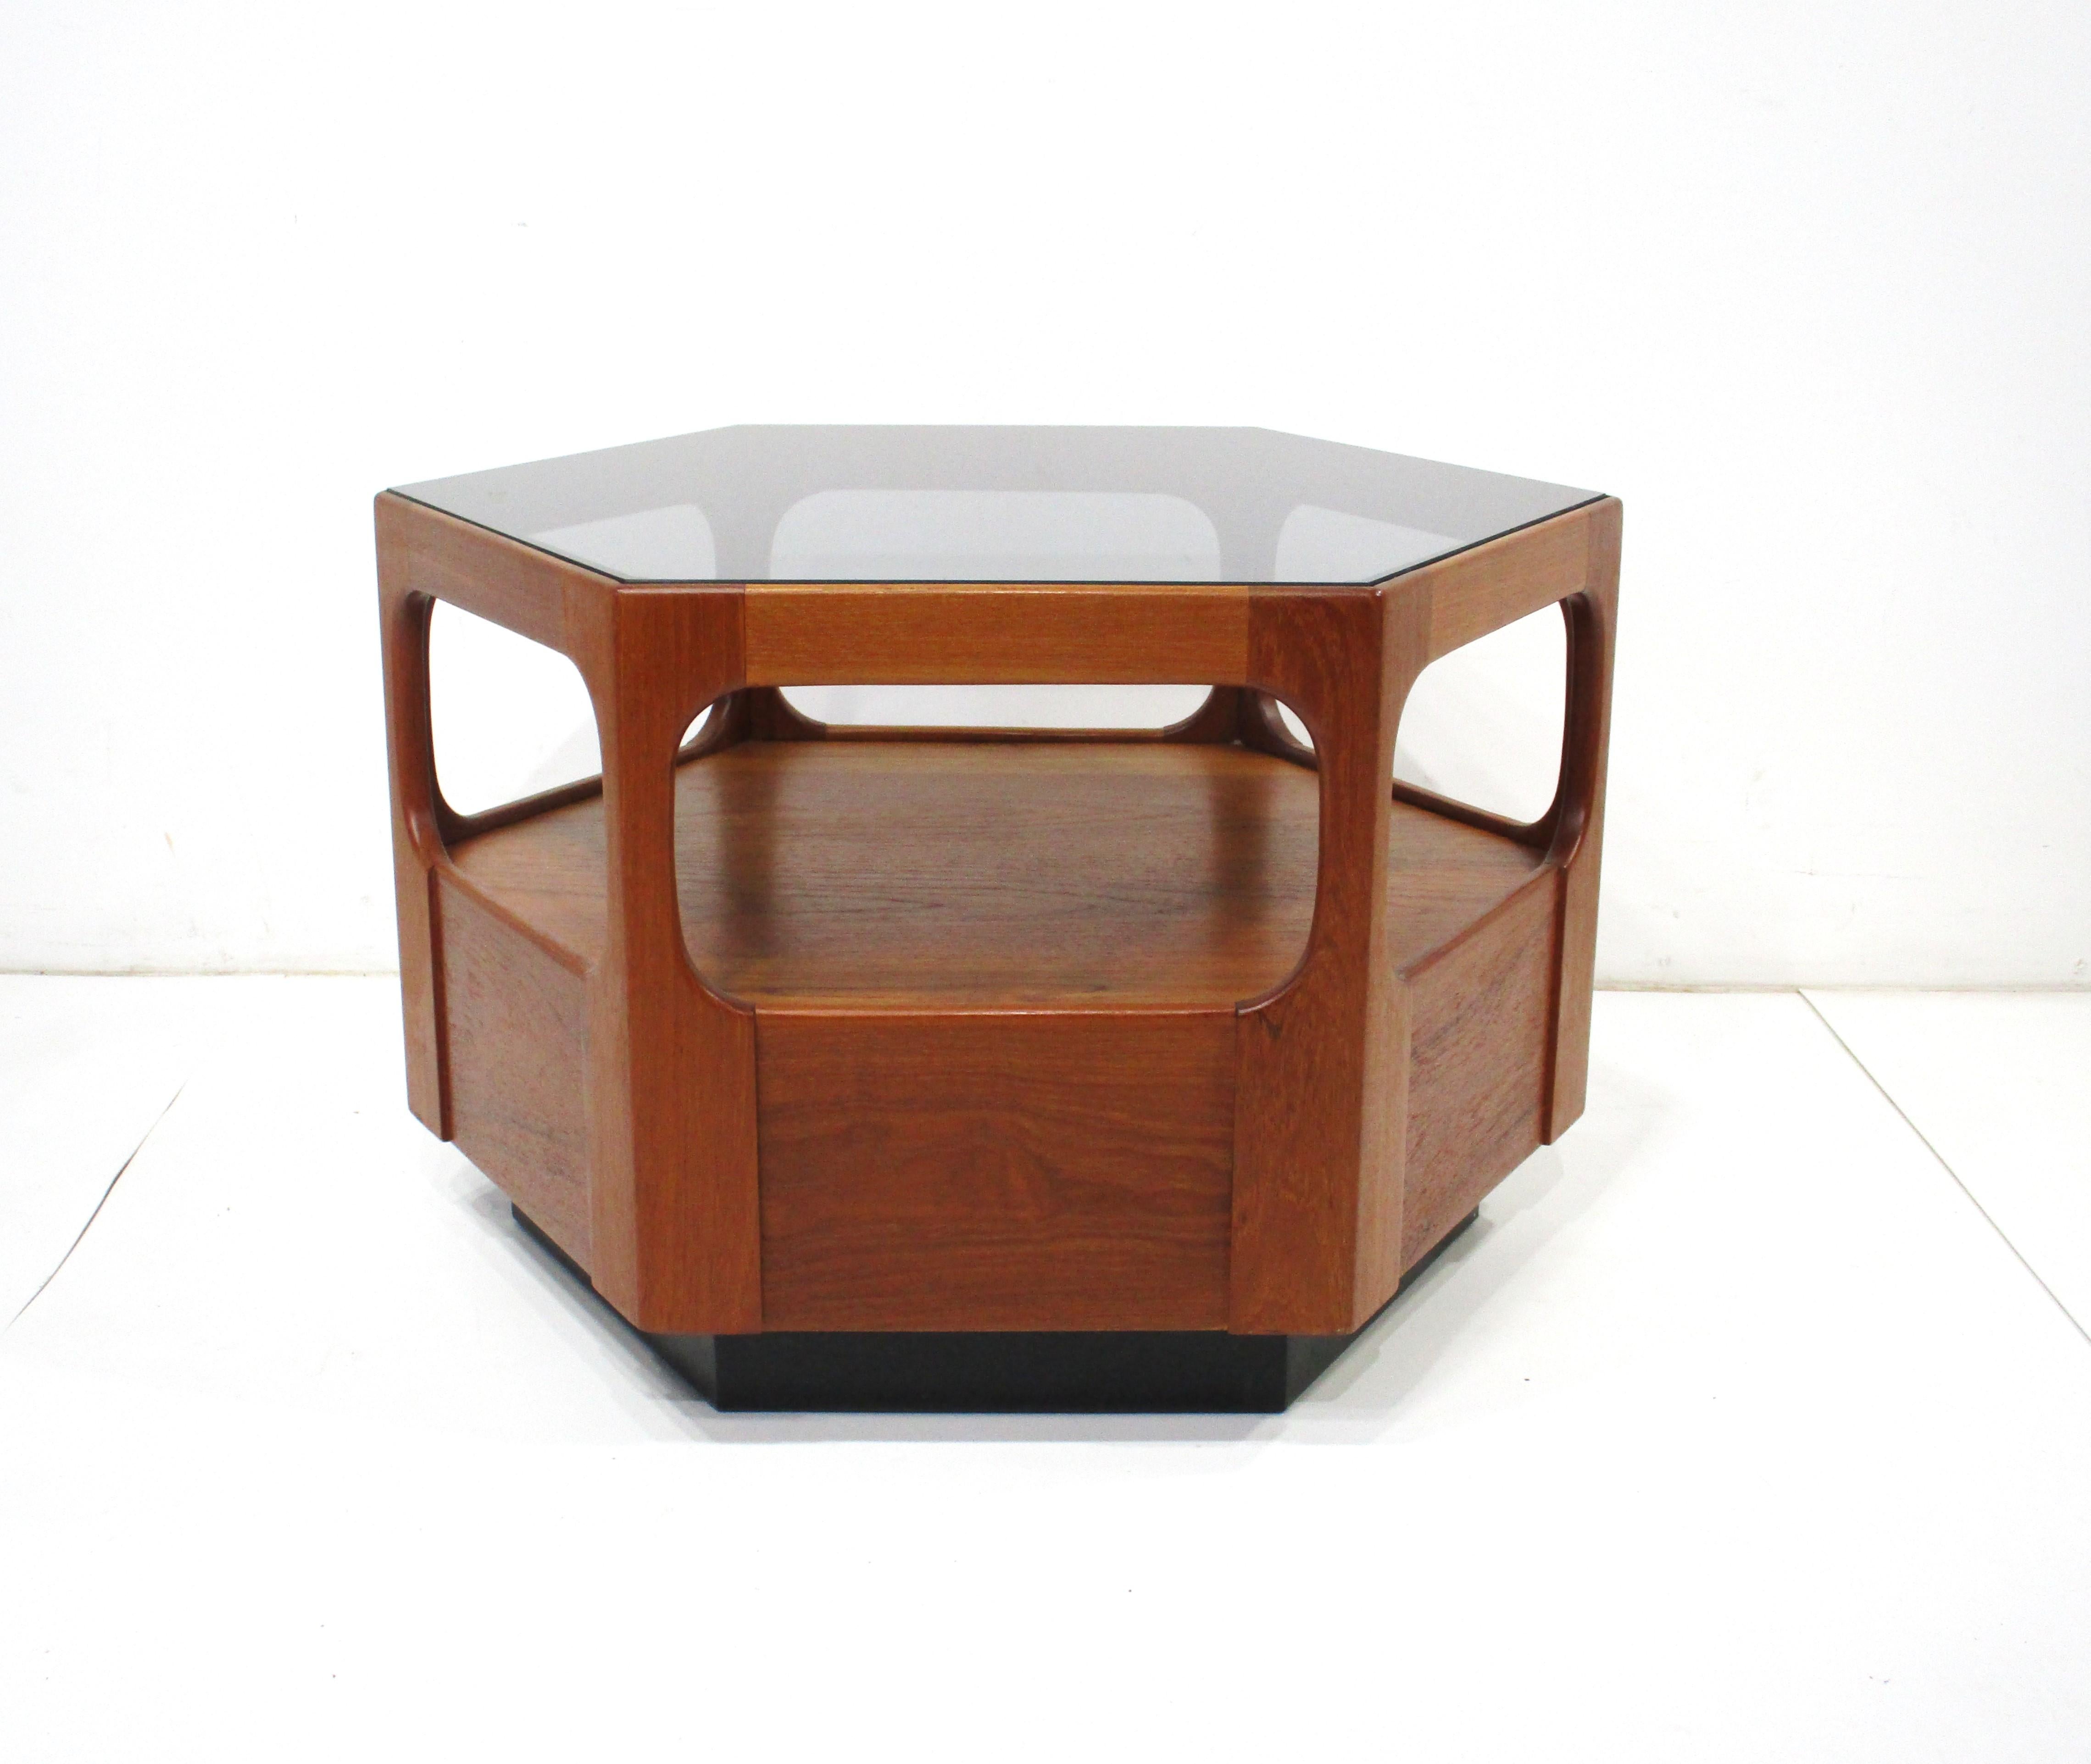 A well crafted walnut octangular and inset smoked glass smaller scale coffee table or can be used as a corner table . With the lower shelve area for extra storage making the piece very useful , manufactured by the cabinetmaker Otmar in the tradition